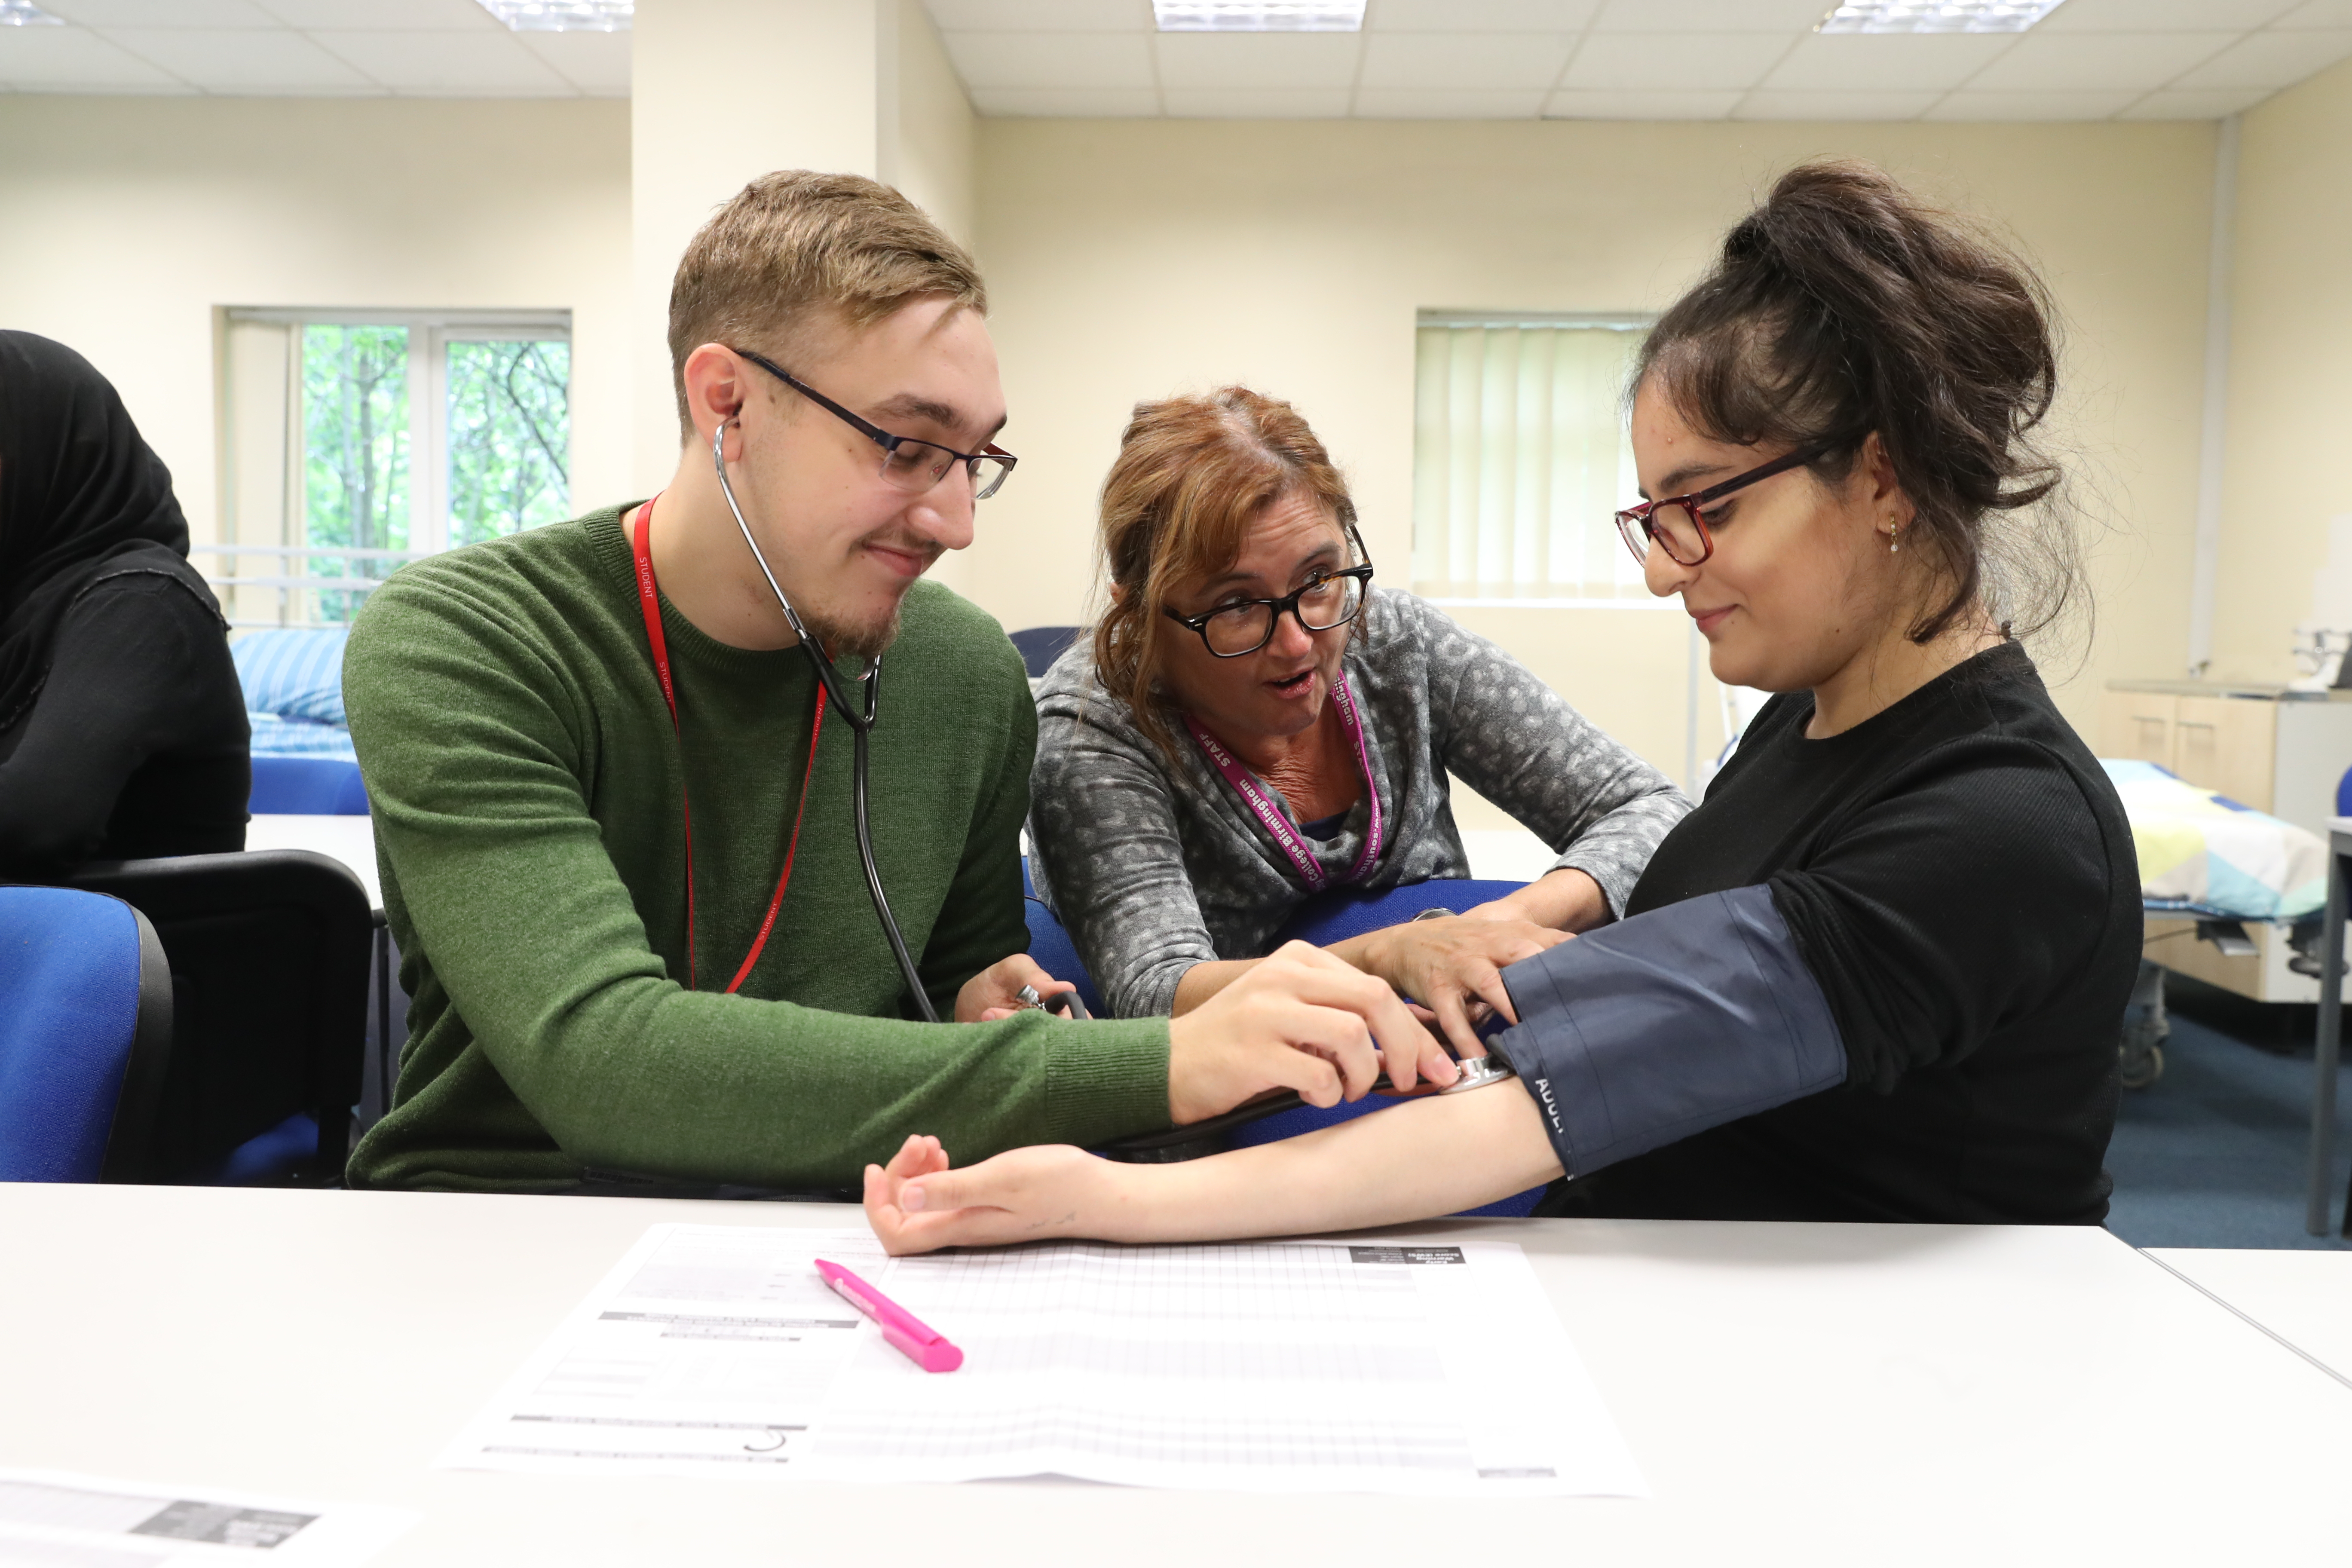 A learning session for health and social care students at South and City College Birmingham, before the Covid-19 pandemic